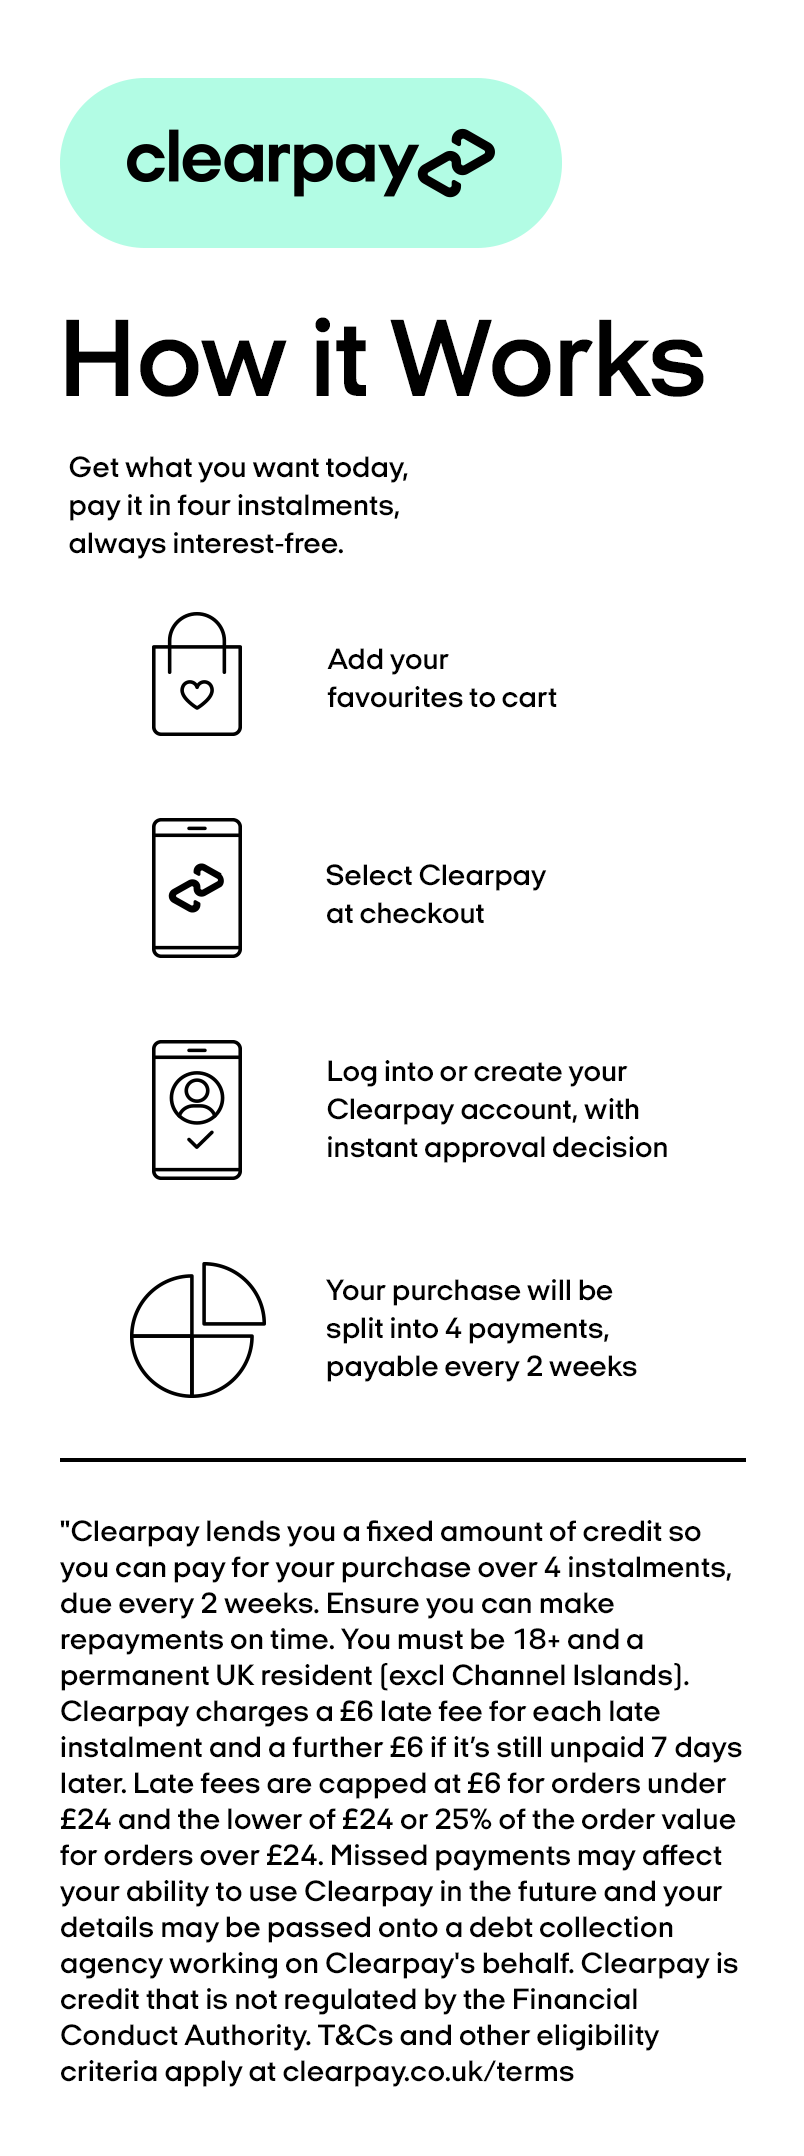 Add your favourites to cart. Select clearpay at checkout. Log into or create your clearpay account, with instant approval decision. Your purchase will be split into 4 payments, payable every two weeks.